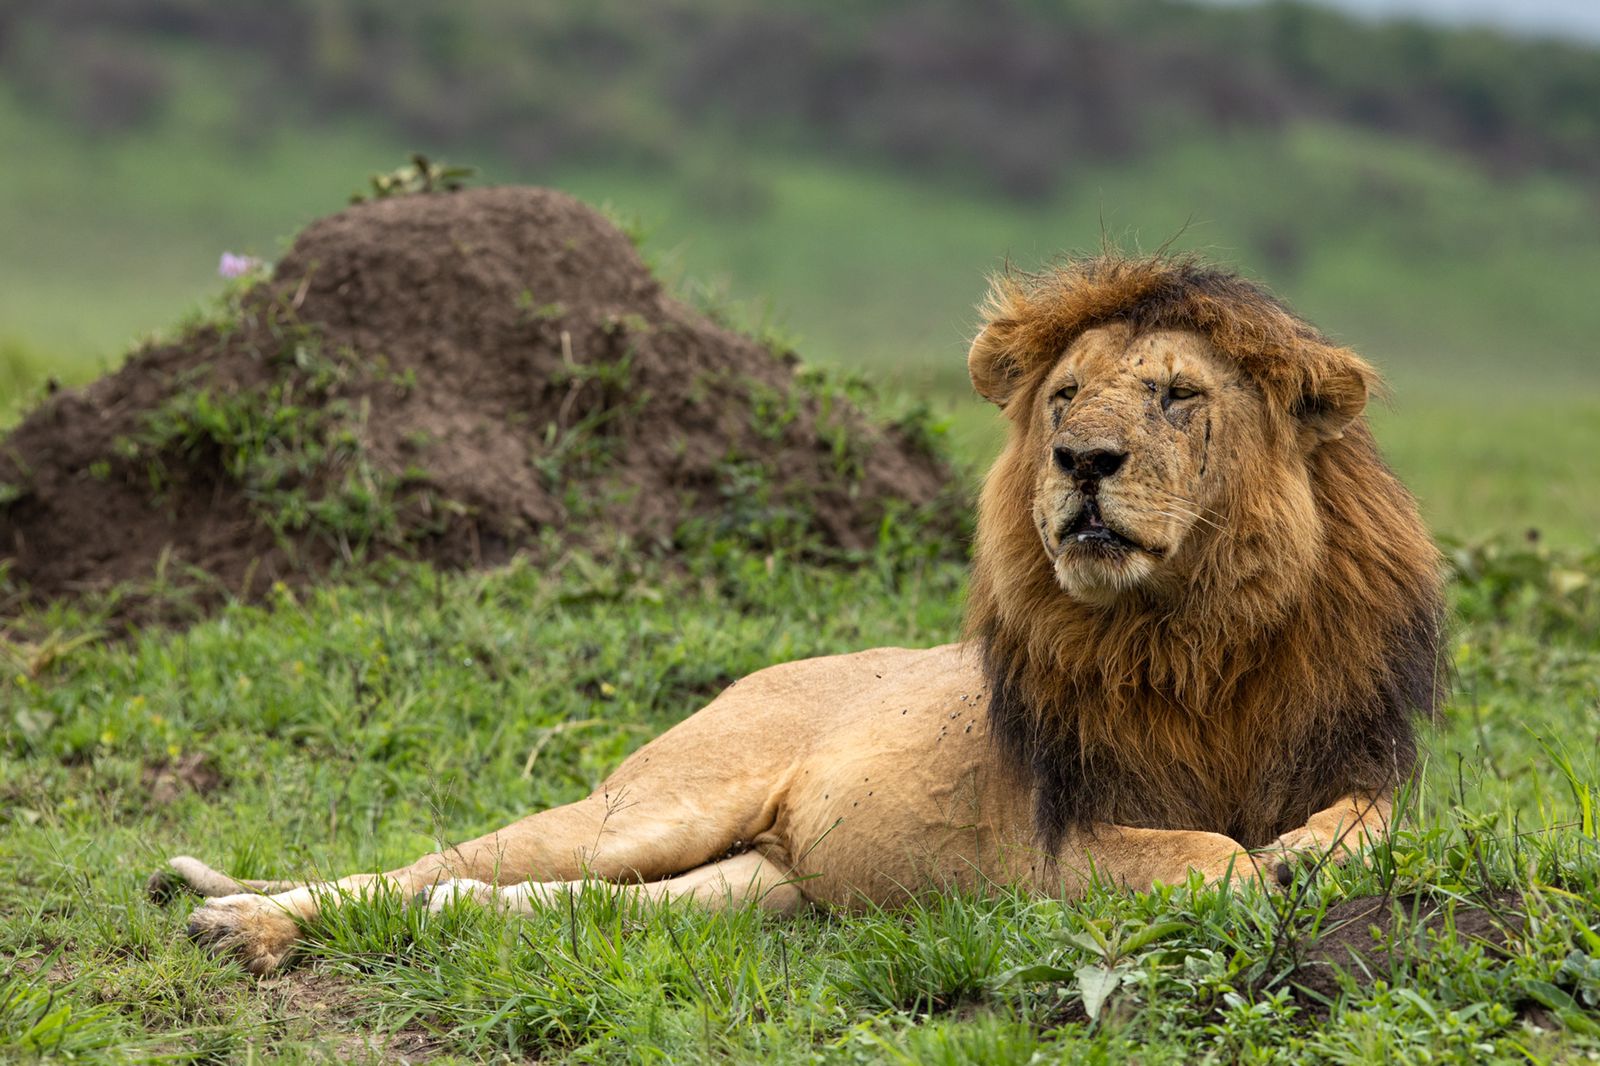 The real-life Lion King